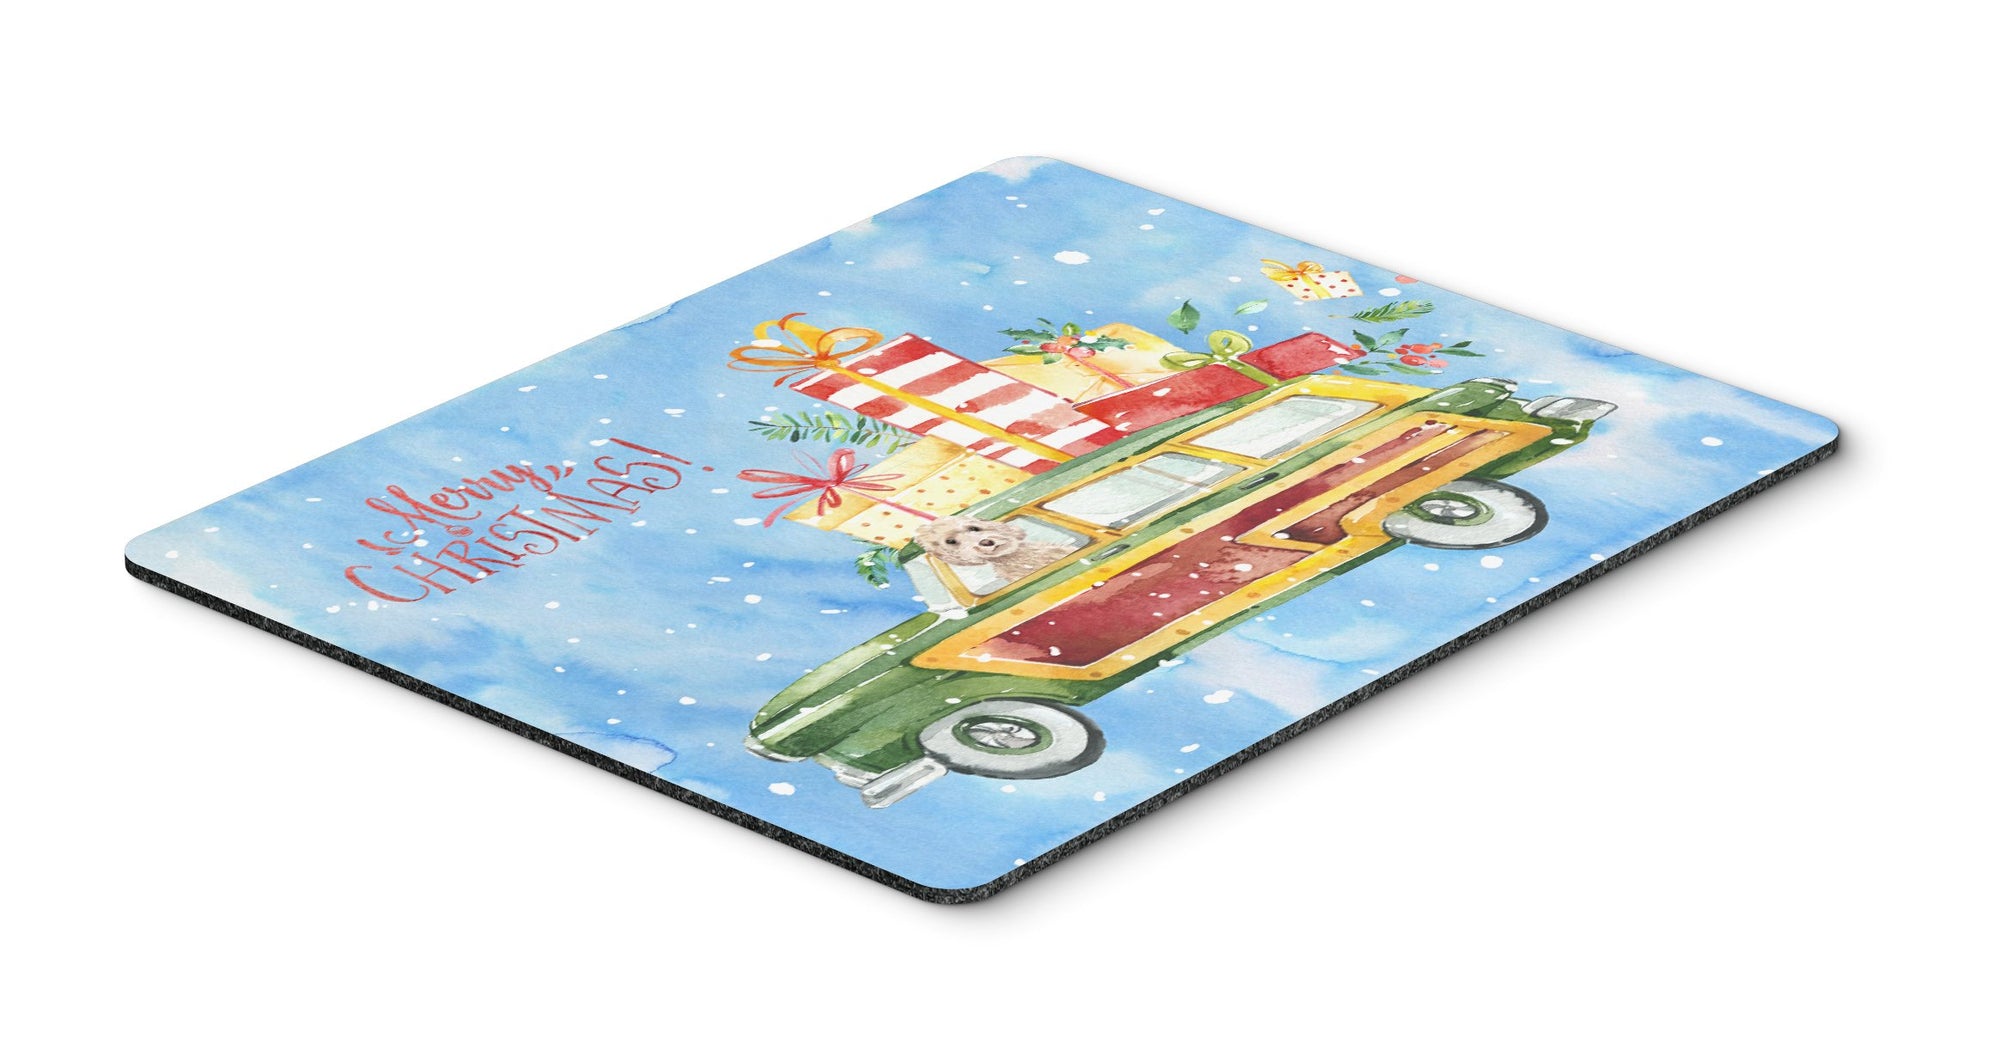 Merry Christmas Champagne Cockapoo Mouse Pad, Hot Pad or Trivet CK2448MP by Caroline's Treasures